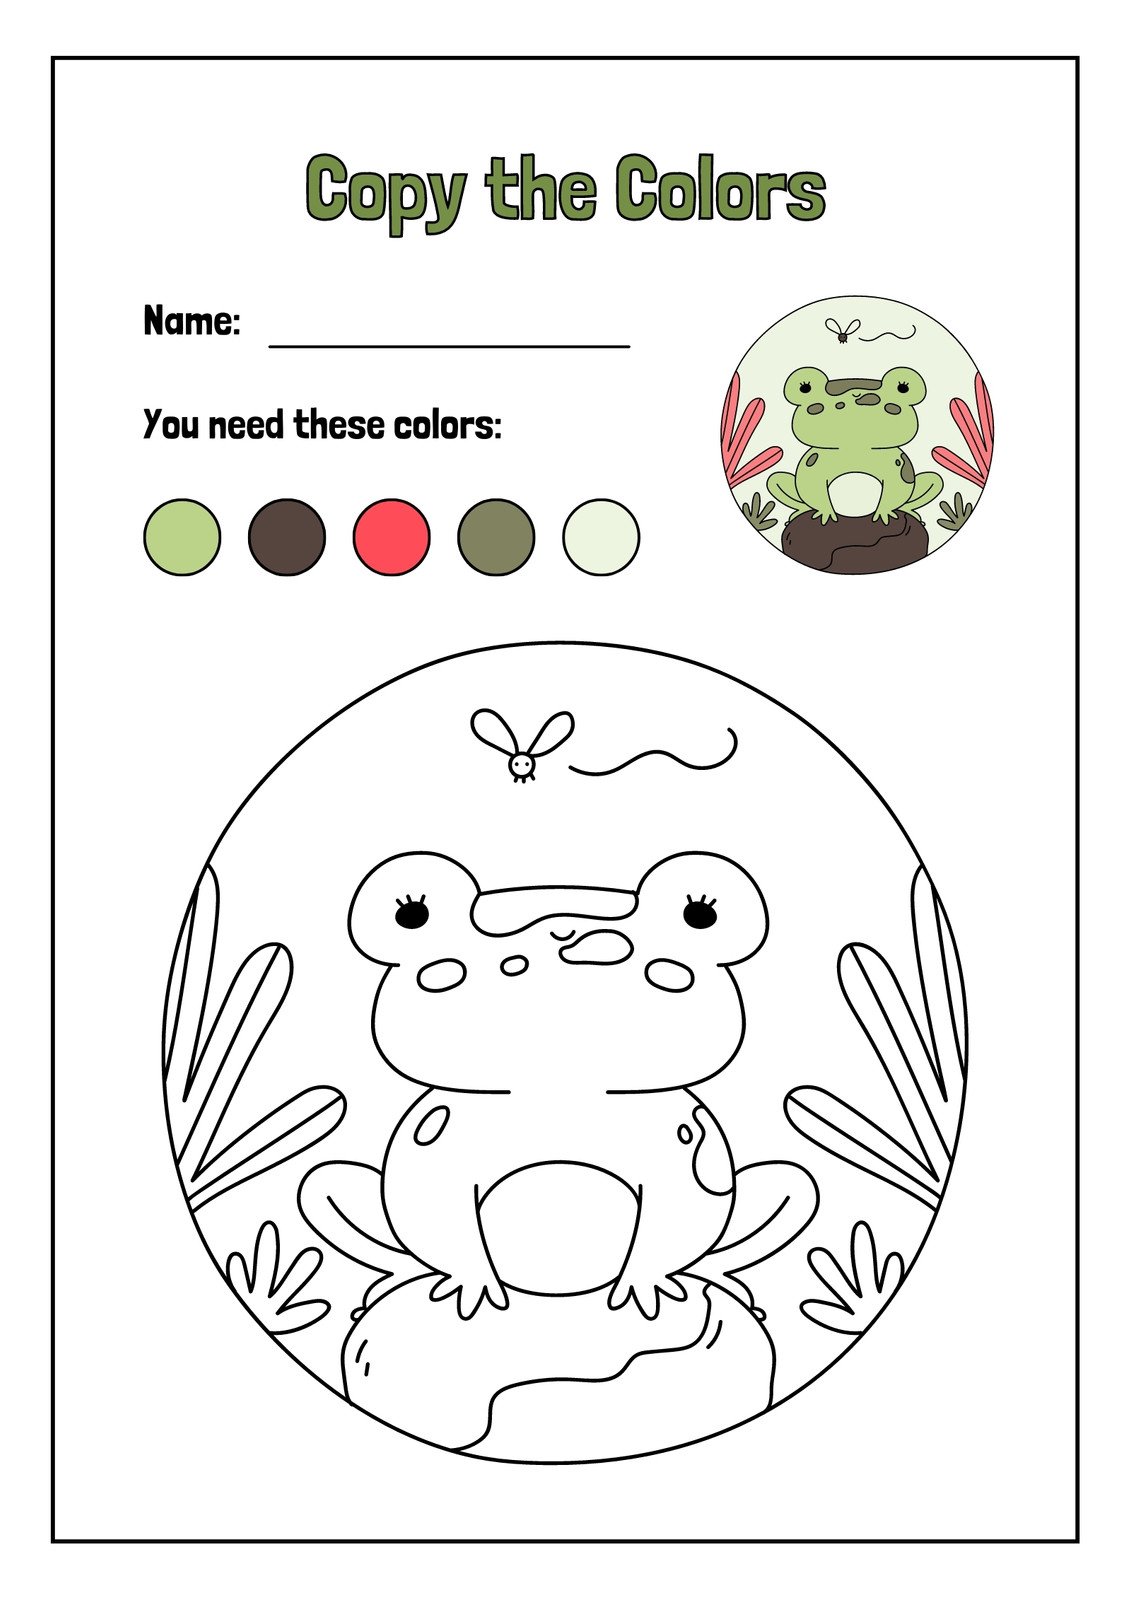 Page 11 - Free printable coloring page templates to customize | Canva